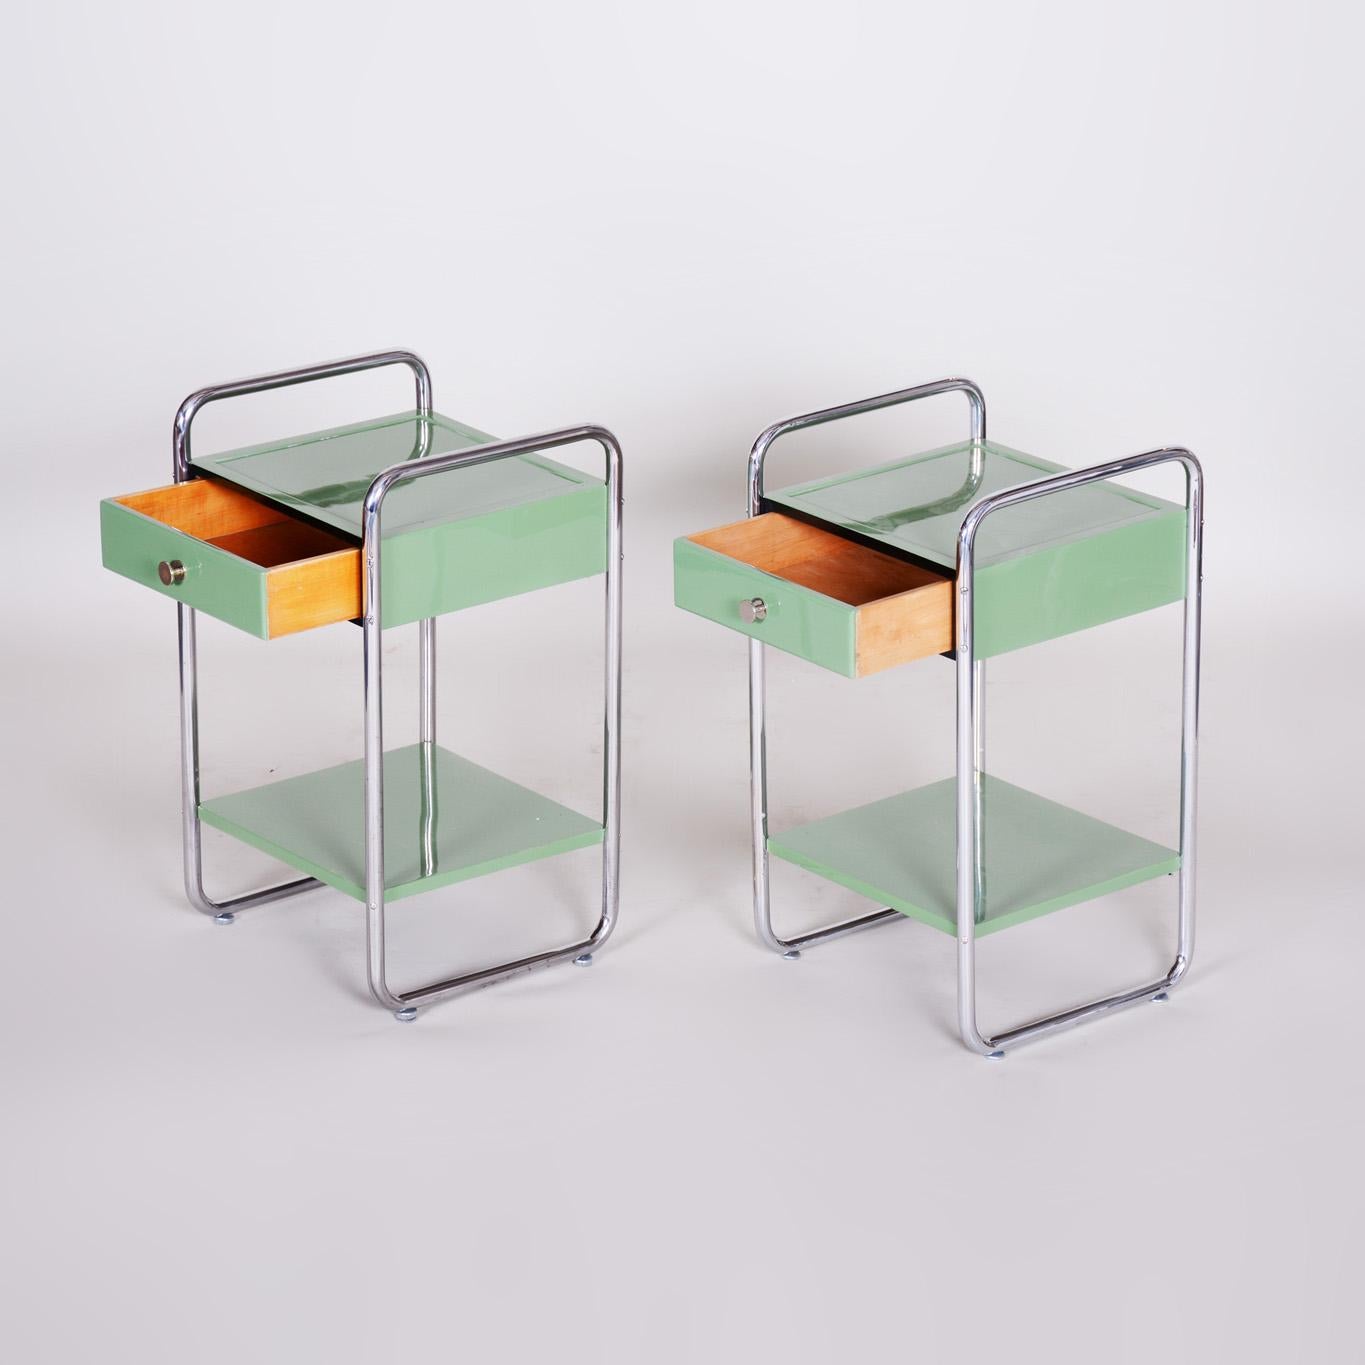 Restored Bauhaus Pair of Bed-Side Tables, Chrome-Plated Steel, Czech, 1930s For Sale 2